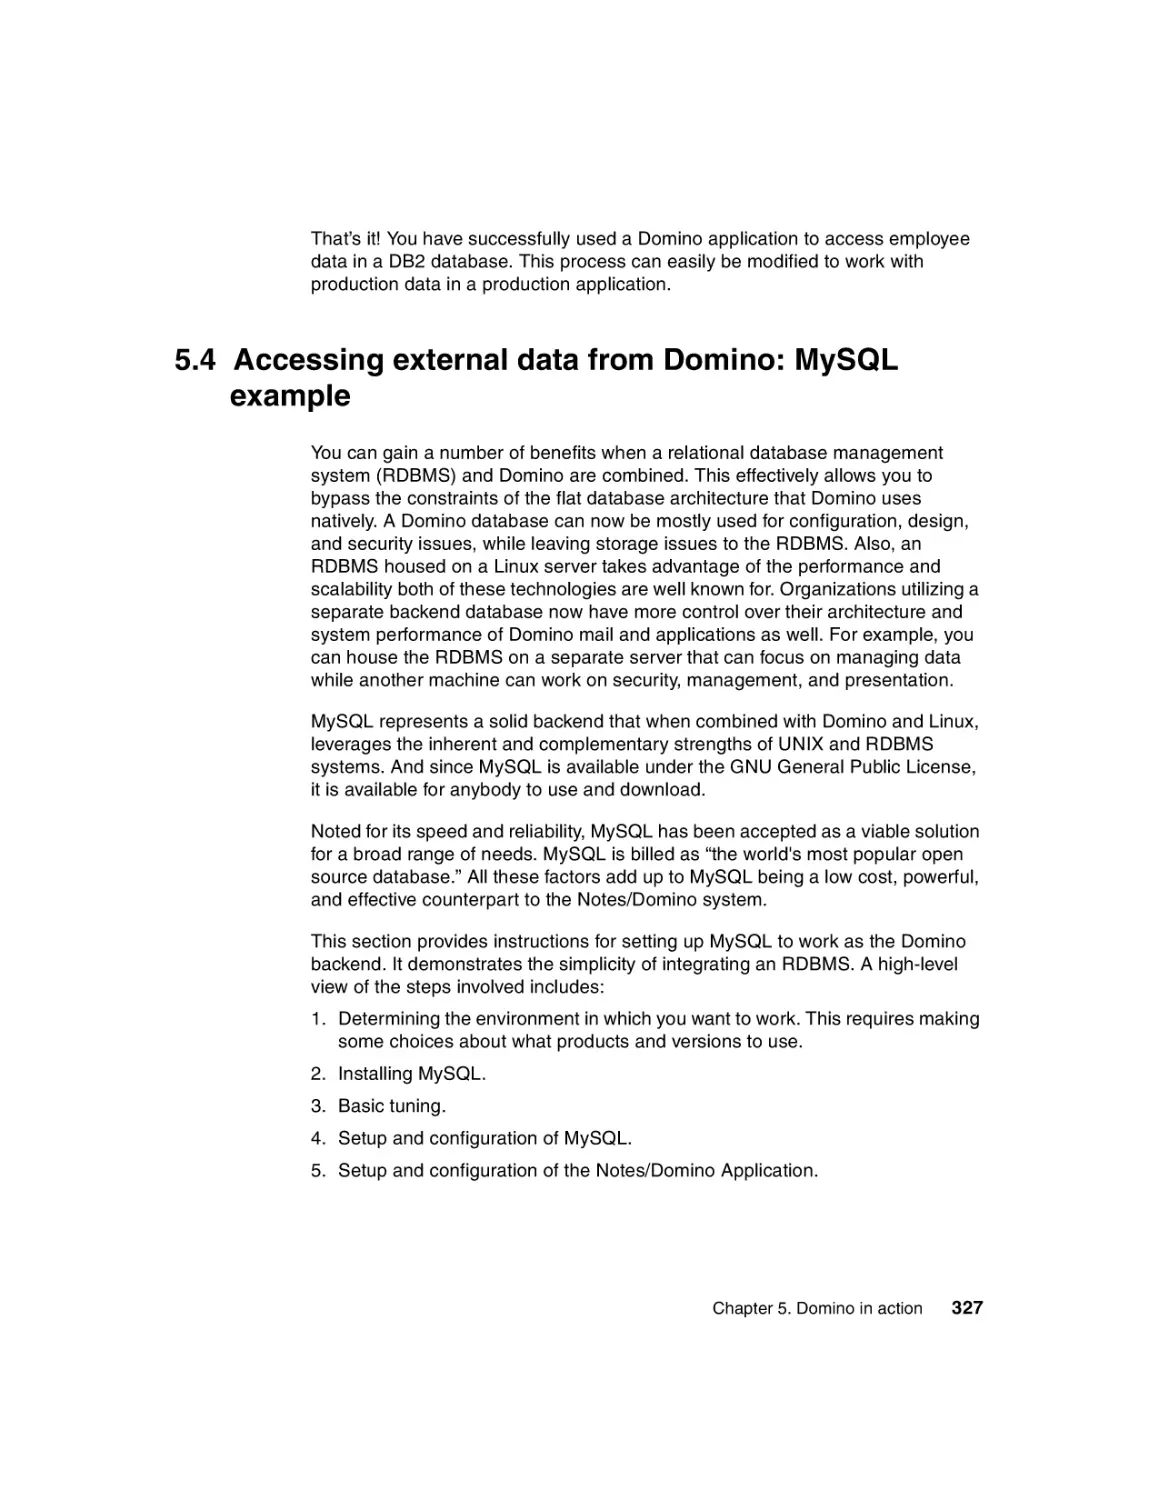 5.4 Accessing external data from Domino